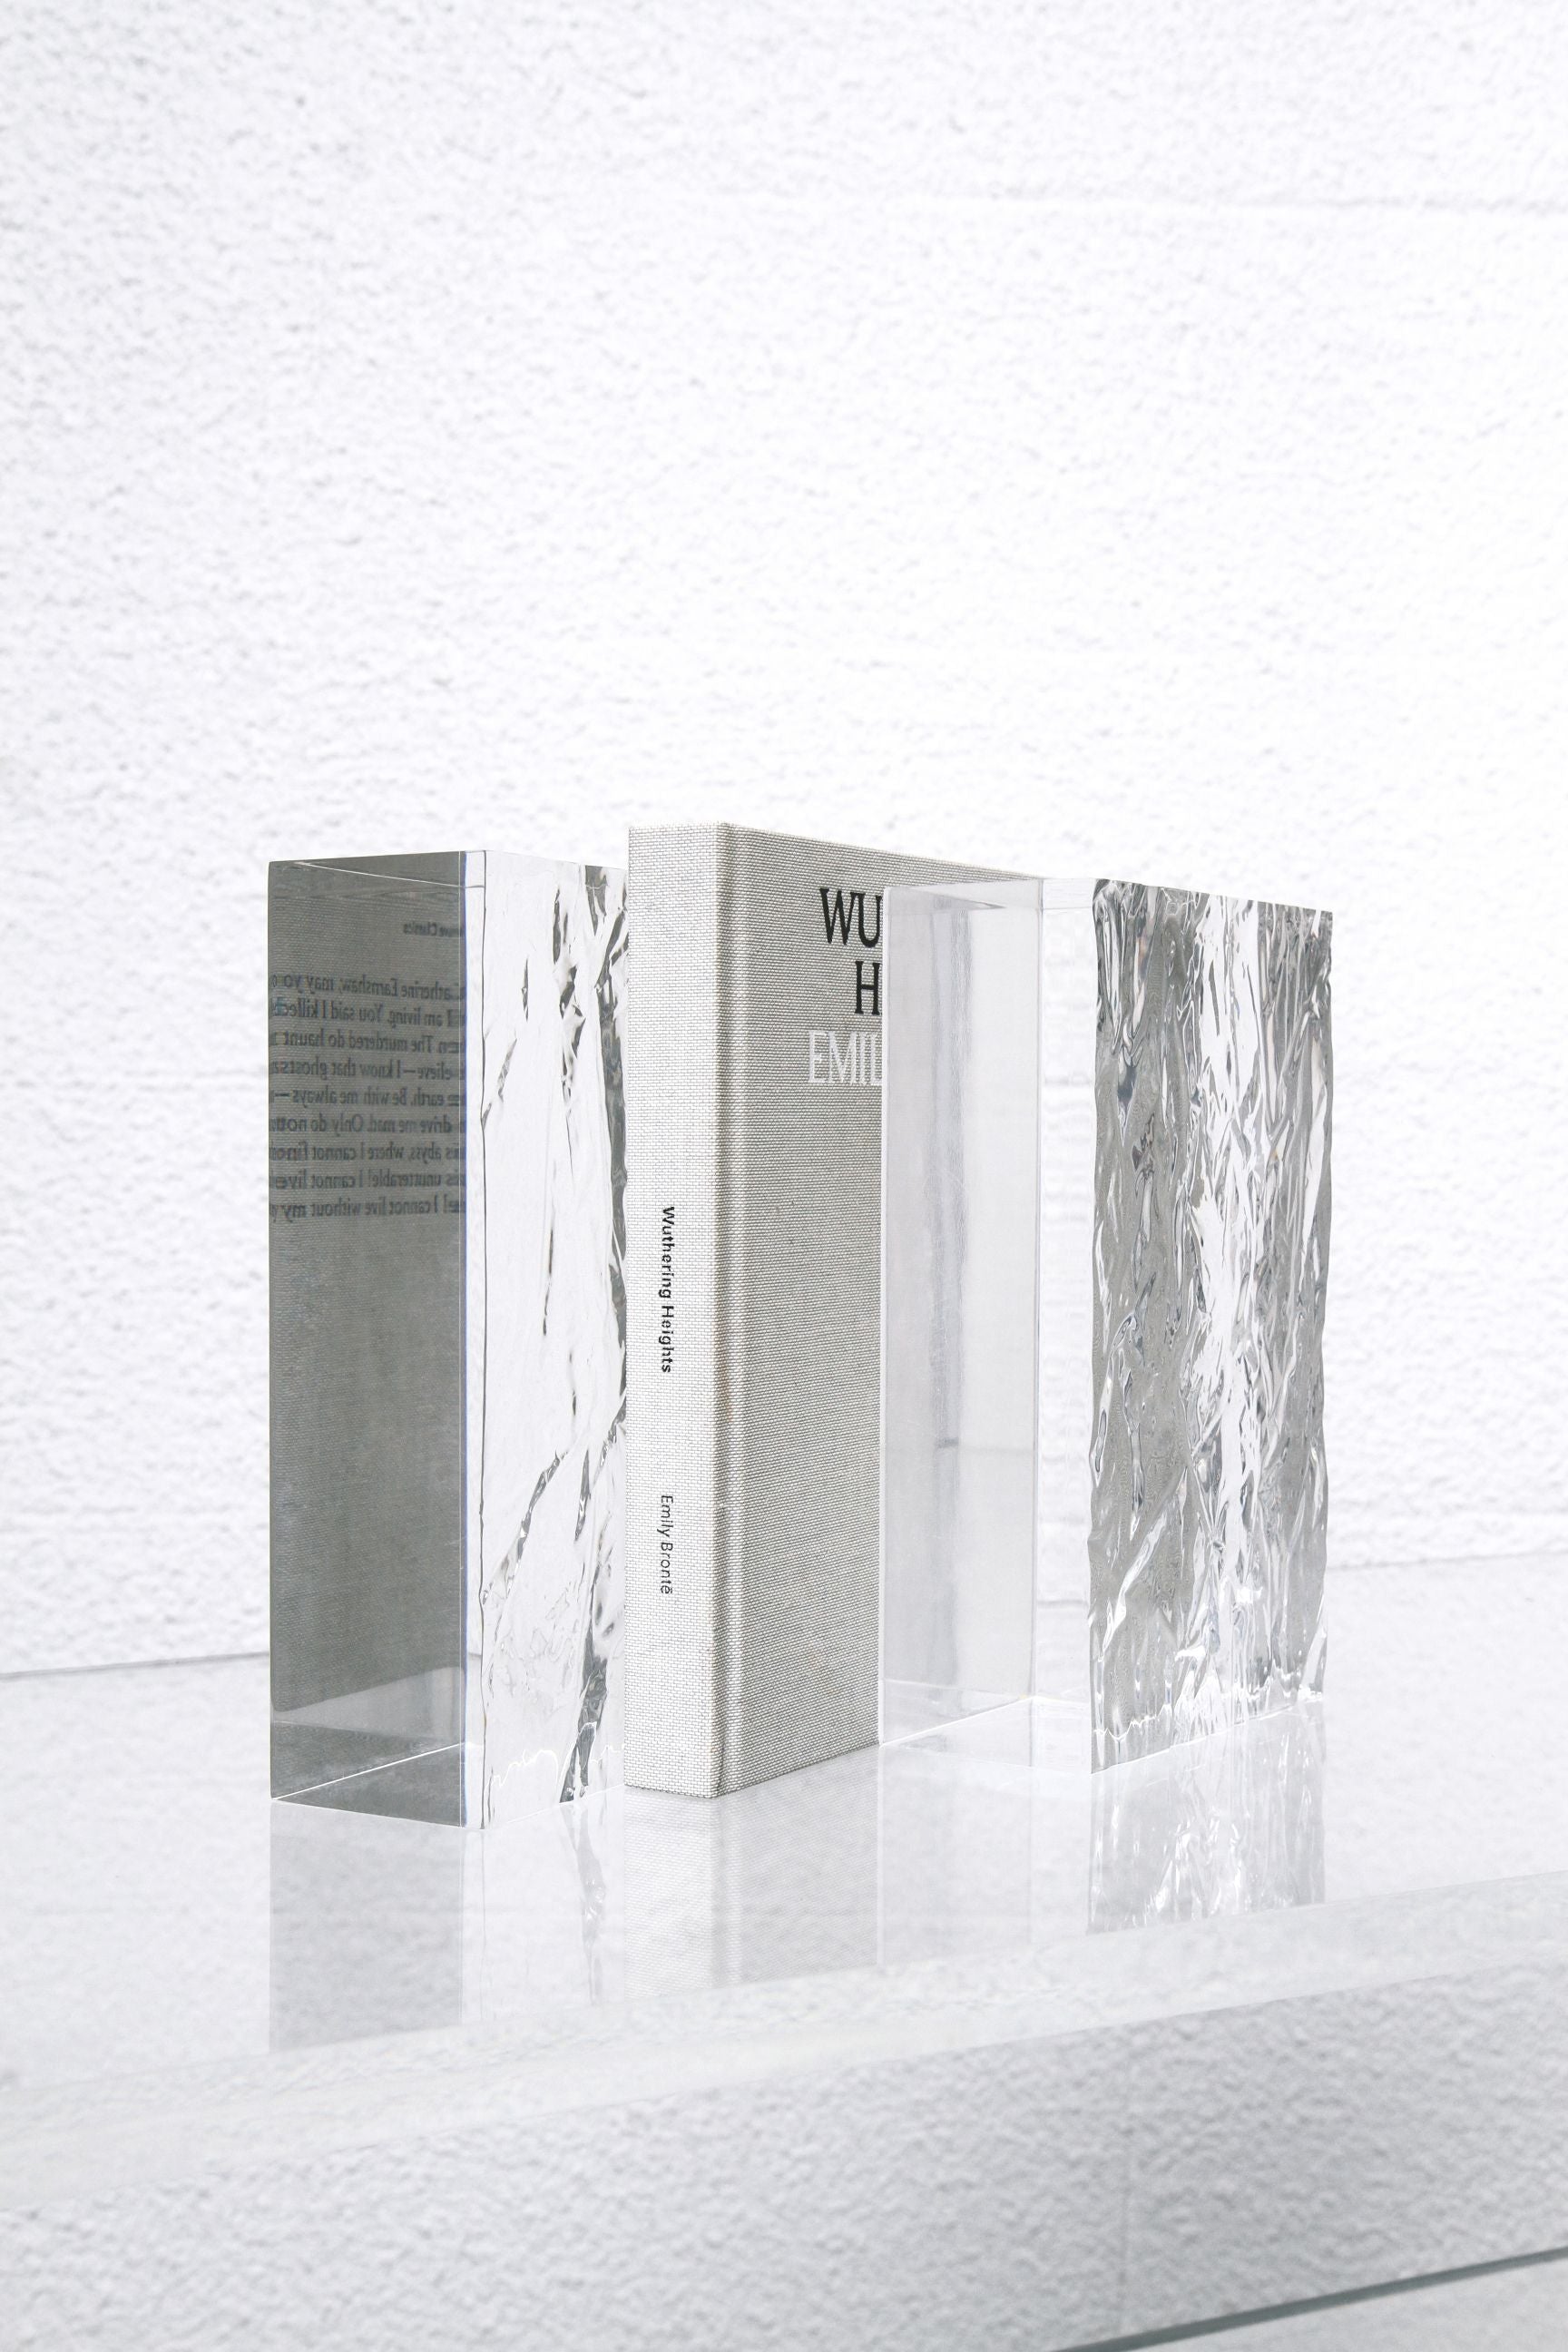 The CRUSHED ICE bookends